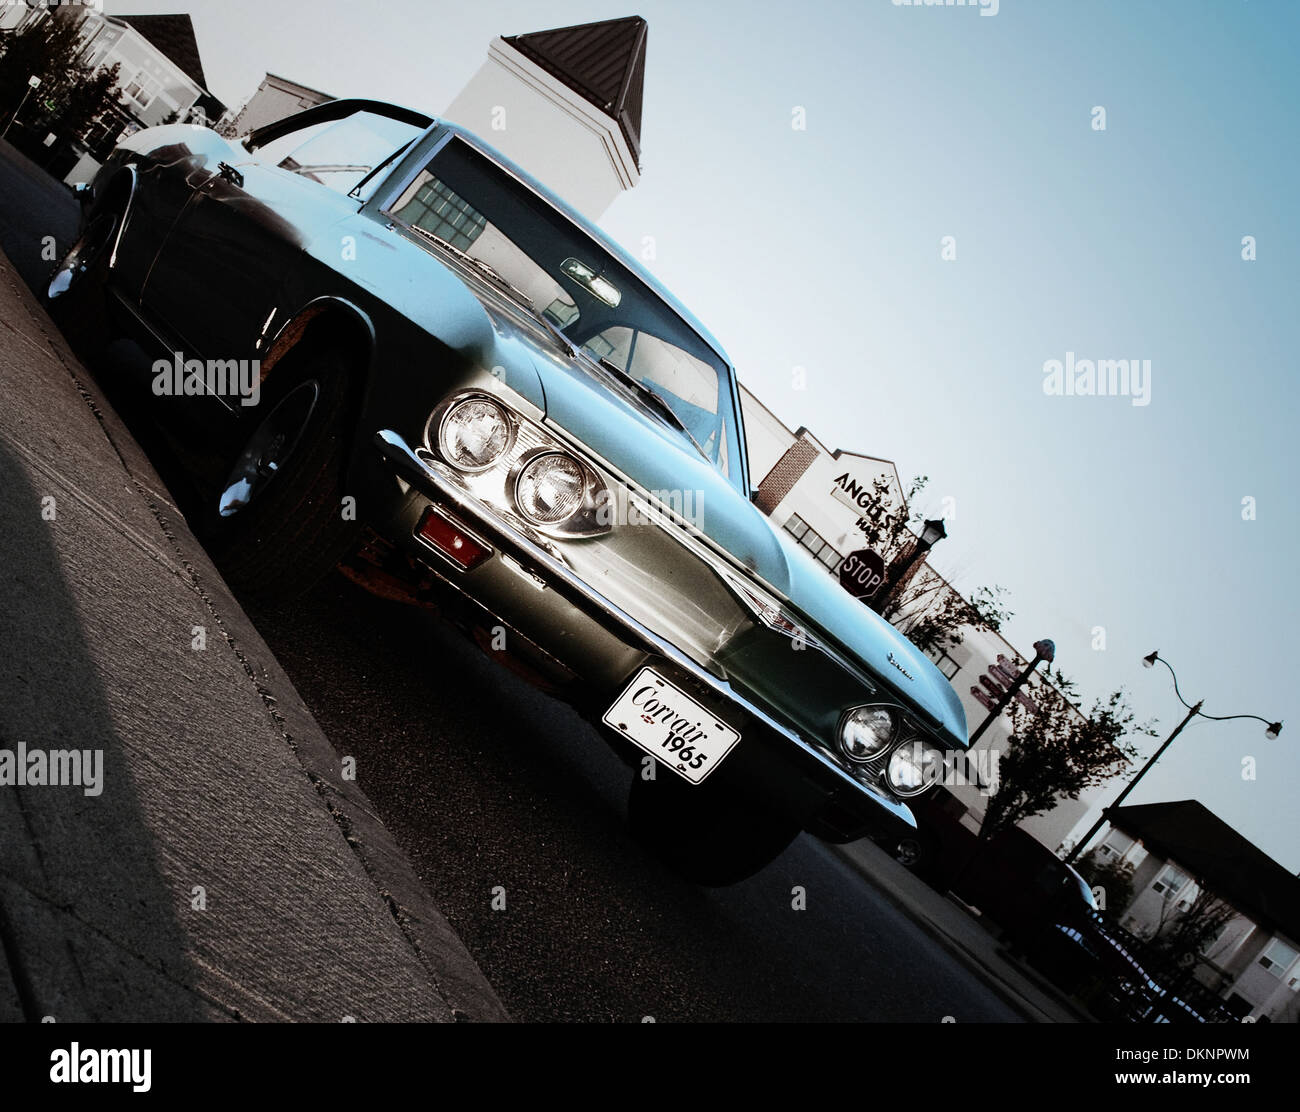 Angled view of a vintage 1965 Chevrolet Corvair. Stock Photo